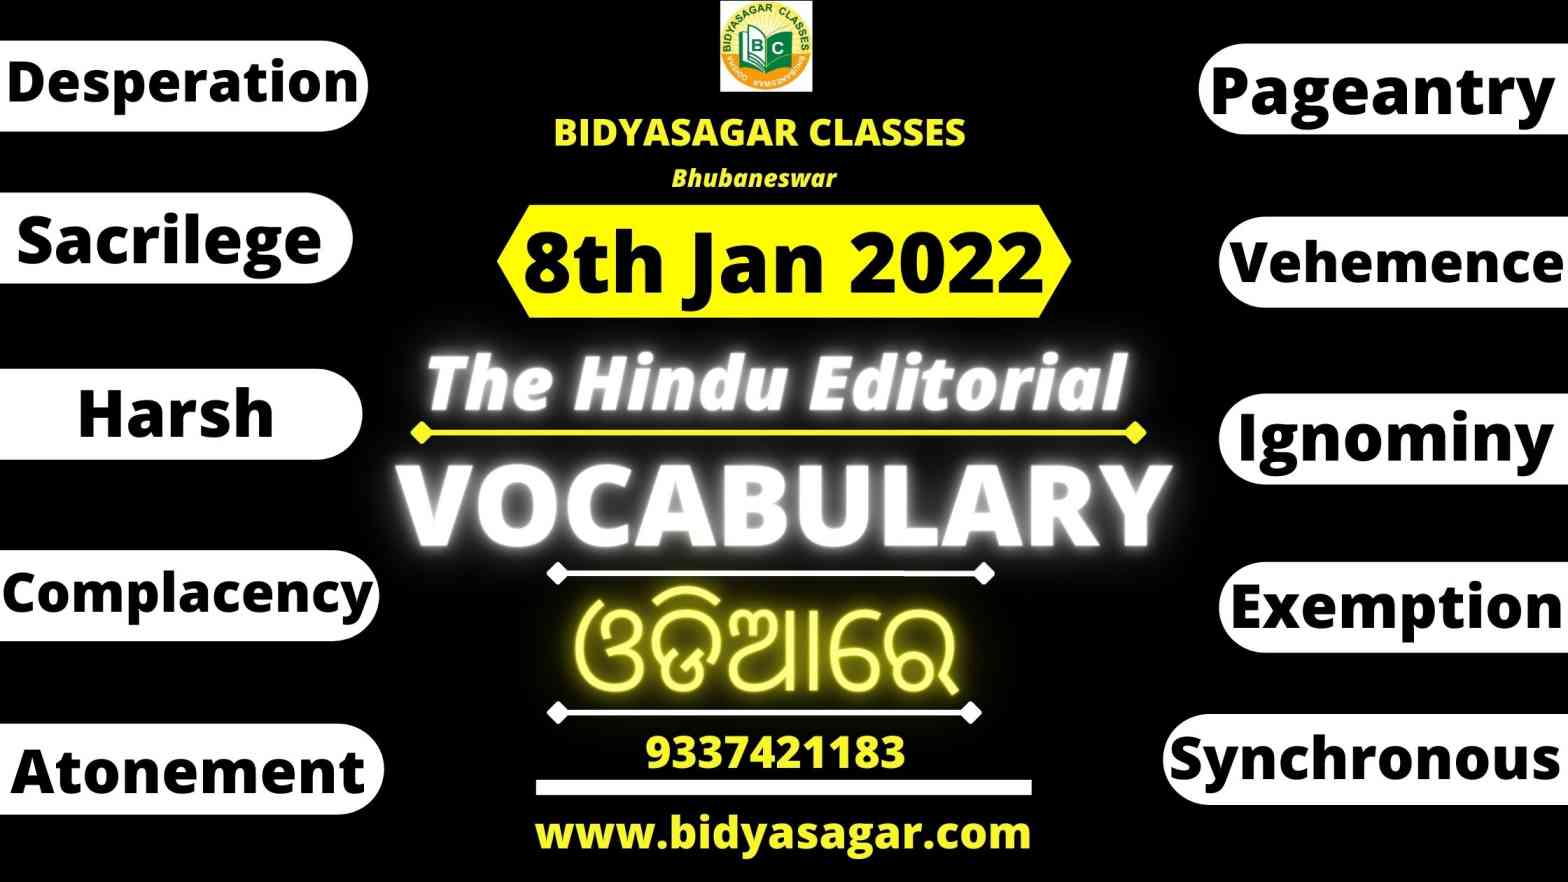 The Hindu Editorial Vocabulary of 8th January 2022